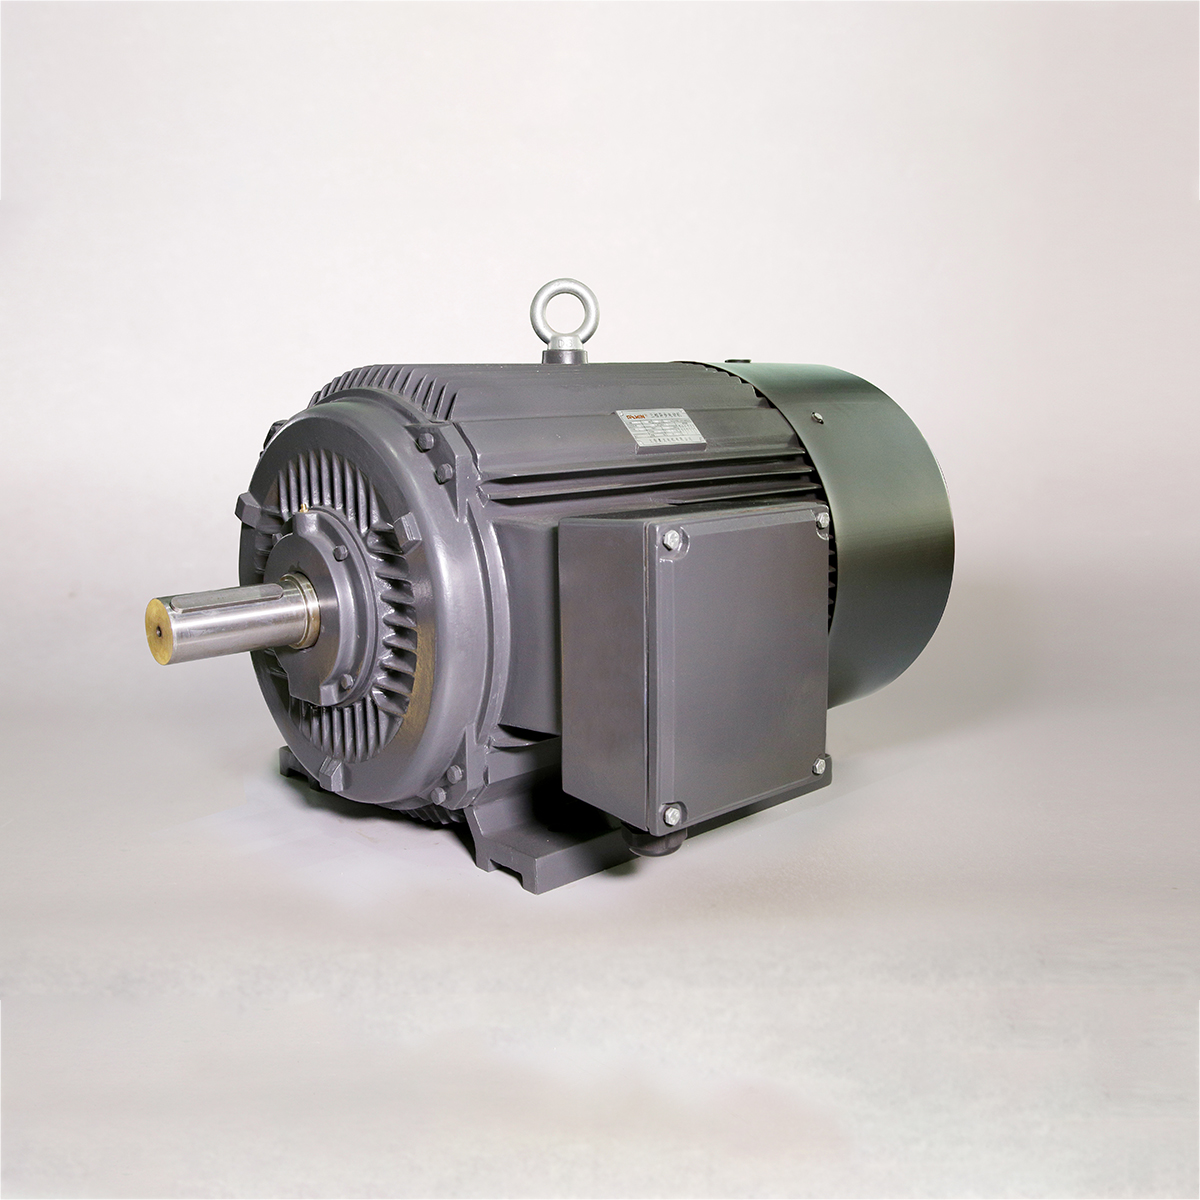 Low Voltage 3-Phase Asynchronous Motor mei Cast Iron Housing Featured Image